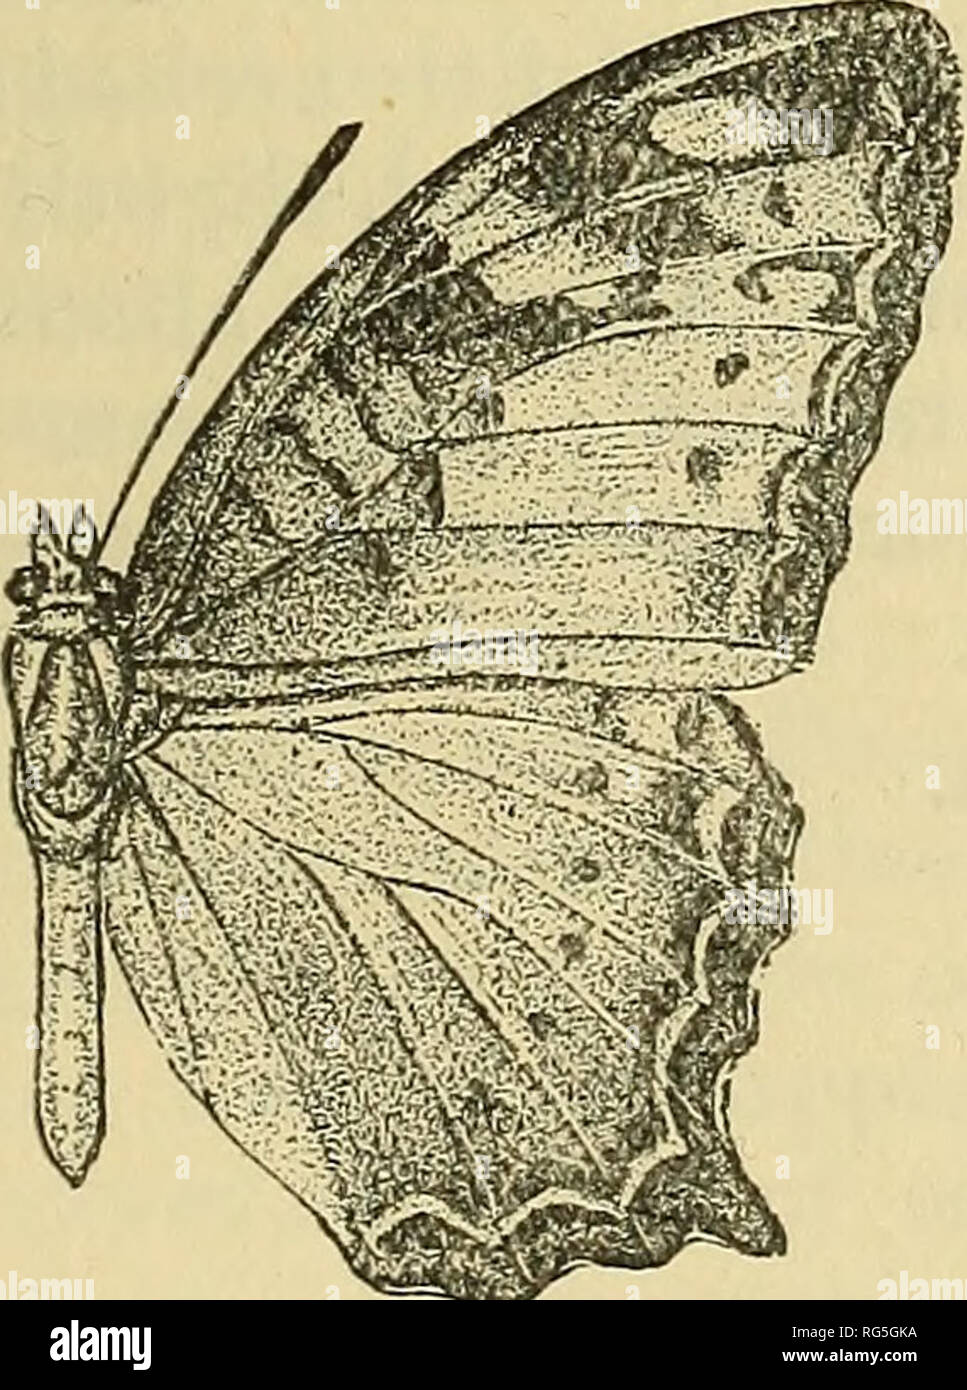 . Butterflies. Vol. I-II.. Lepidoptera. ISSORIA. 415 Genus ISSORIA. Issoria, Hihbner, Verz. bek. Schmett. 1816, p. 31; Moore, Lep. lnd. iv, 1899-1900, p. 201. Type, /. egista, Cramer, from the Moluccas. Range. Indo-Malayan Region. 3 2. Fore wing long, triangular; costa evenly arched, apex subacute; termen even, oblique, only slightly sinuous; tornus rounded; dorsum sinuous; cell not quite half the length of the wing; the neuration in both fore and hind wings is somewhat similar to that of Atella, but differs as follows : in the fore wing, vein 11 from well before, not from apex of cell; vein 1 Stock Photo